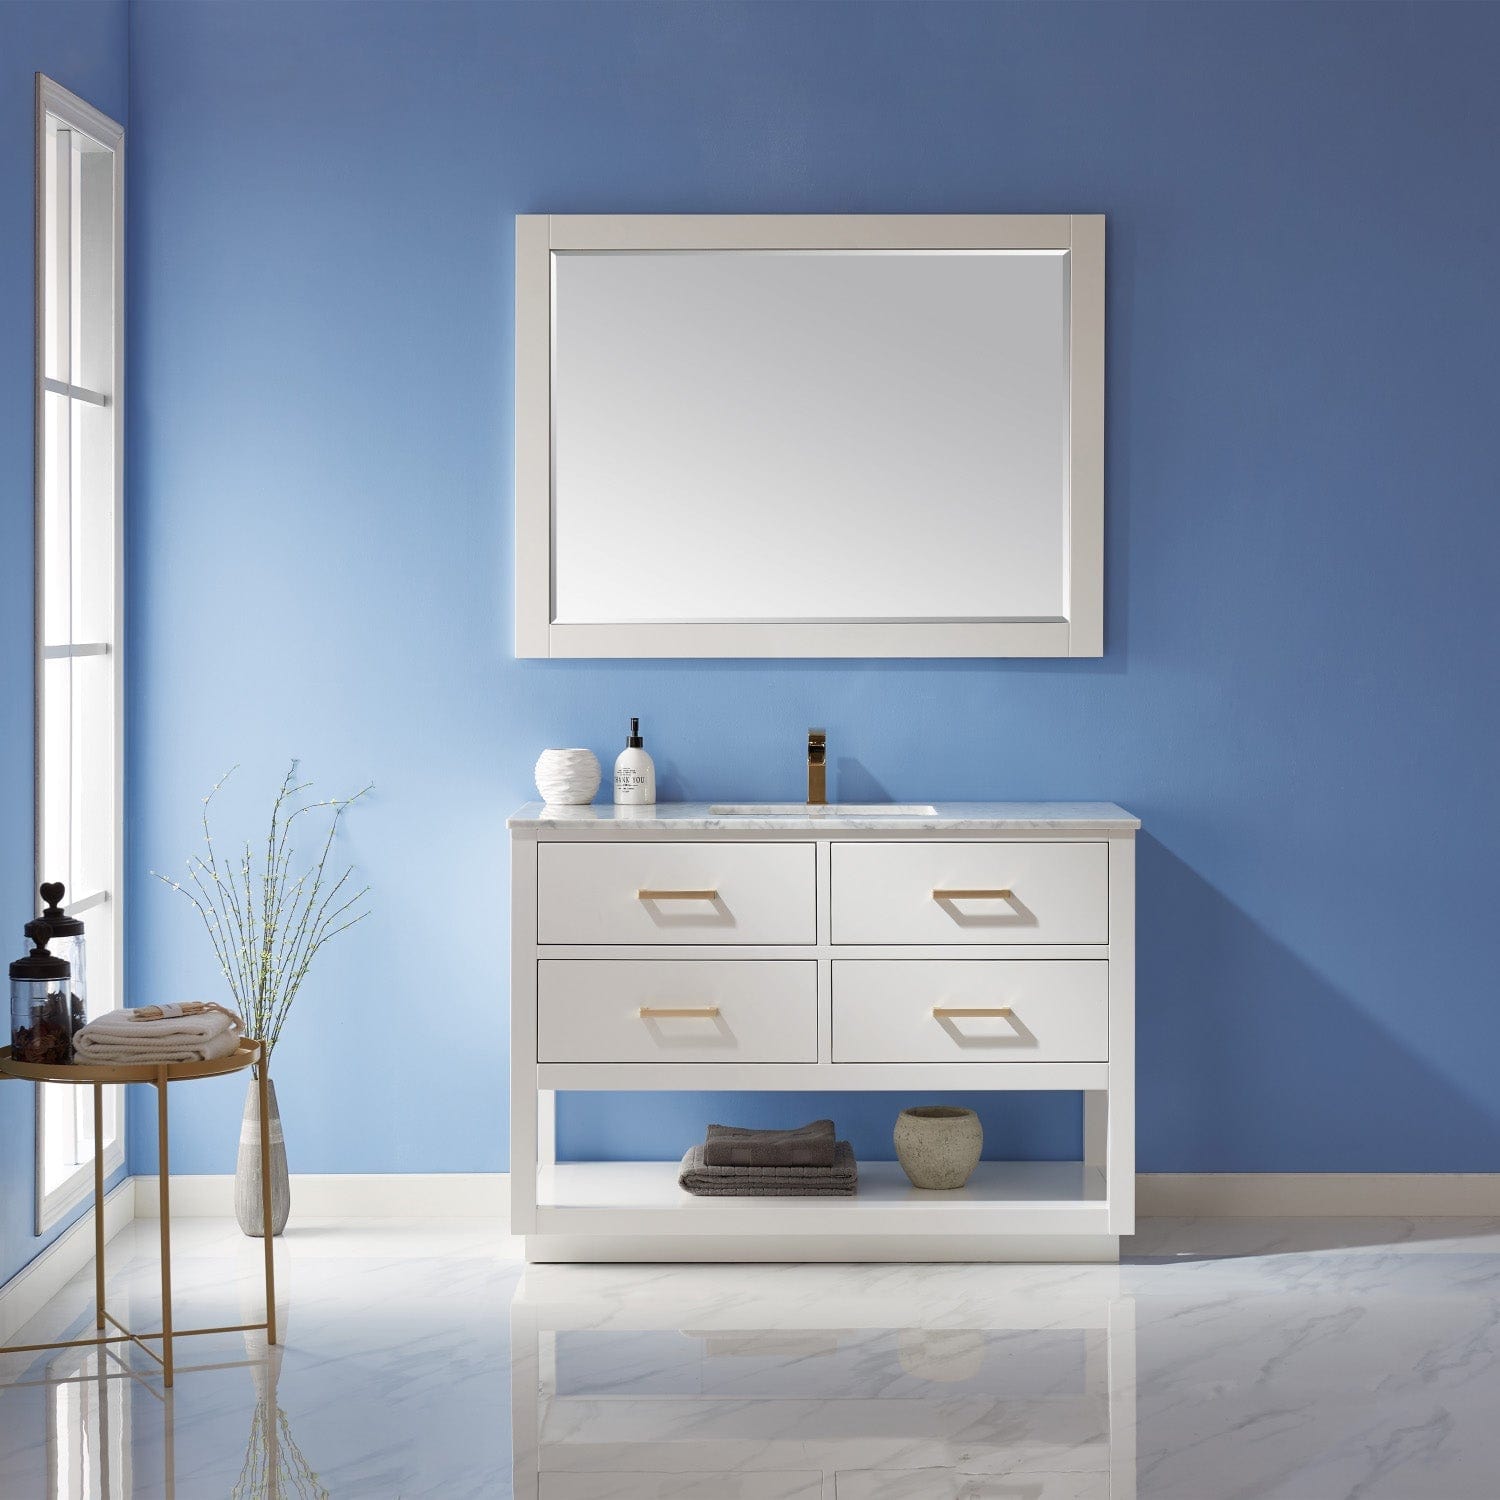 Altair Remi 48" Single Bathroom Vanity Set in White and Carrara White Marble Countertop with Mirror 532048-WH-CA - Molaix631112971492Vanity532048-WH-CA